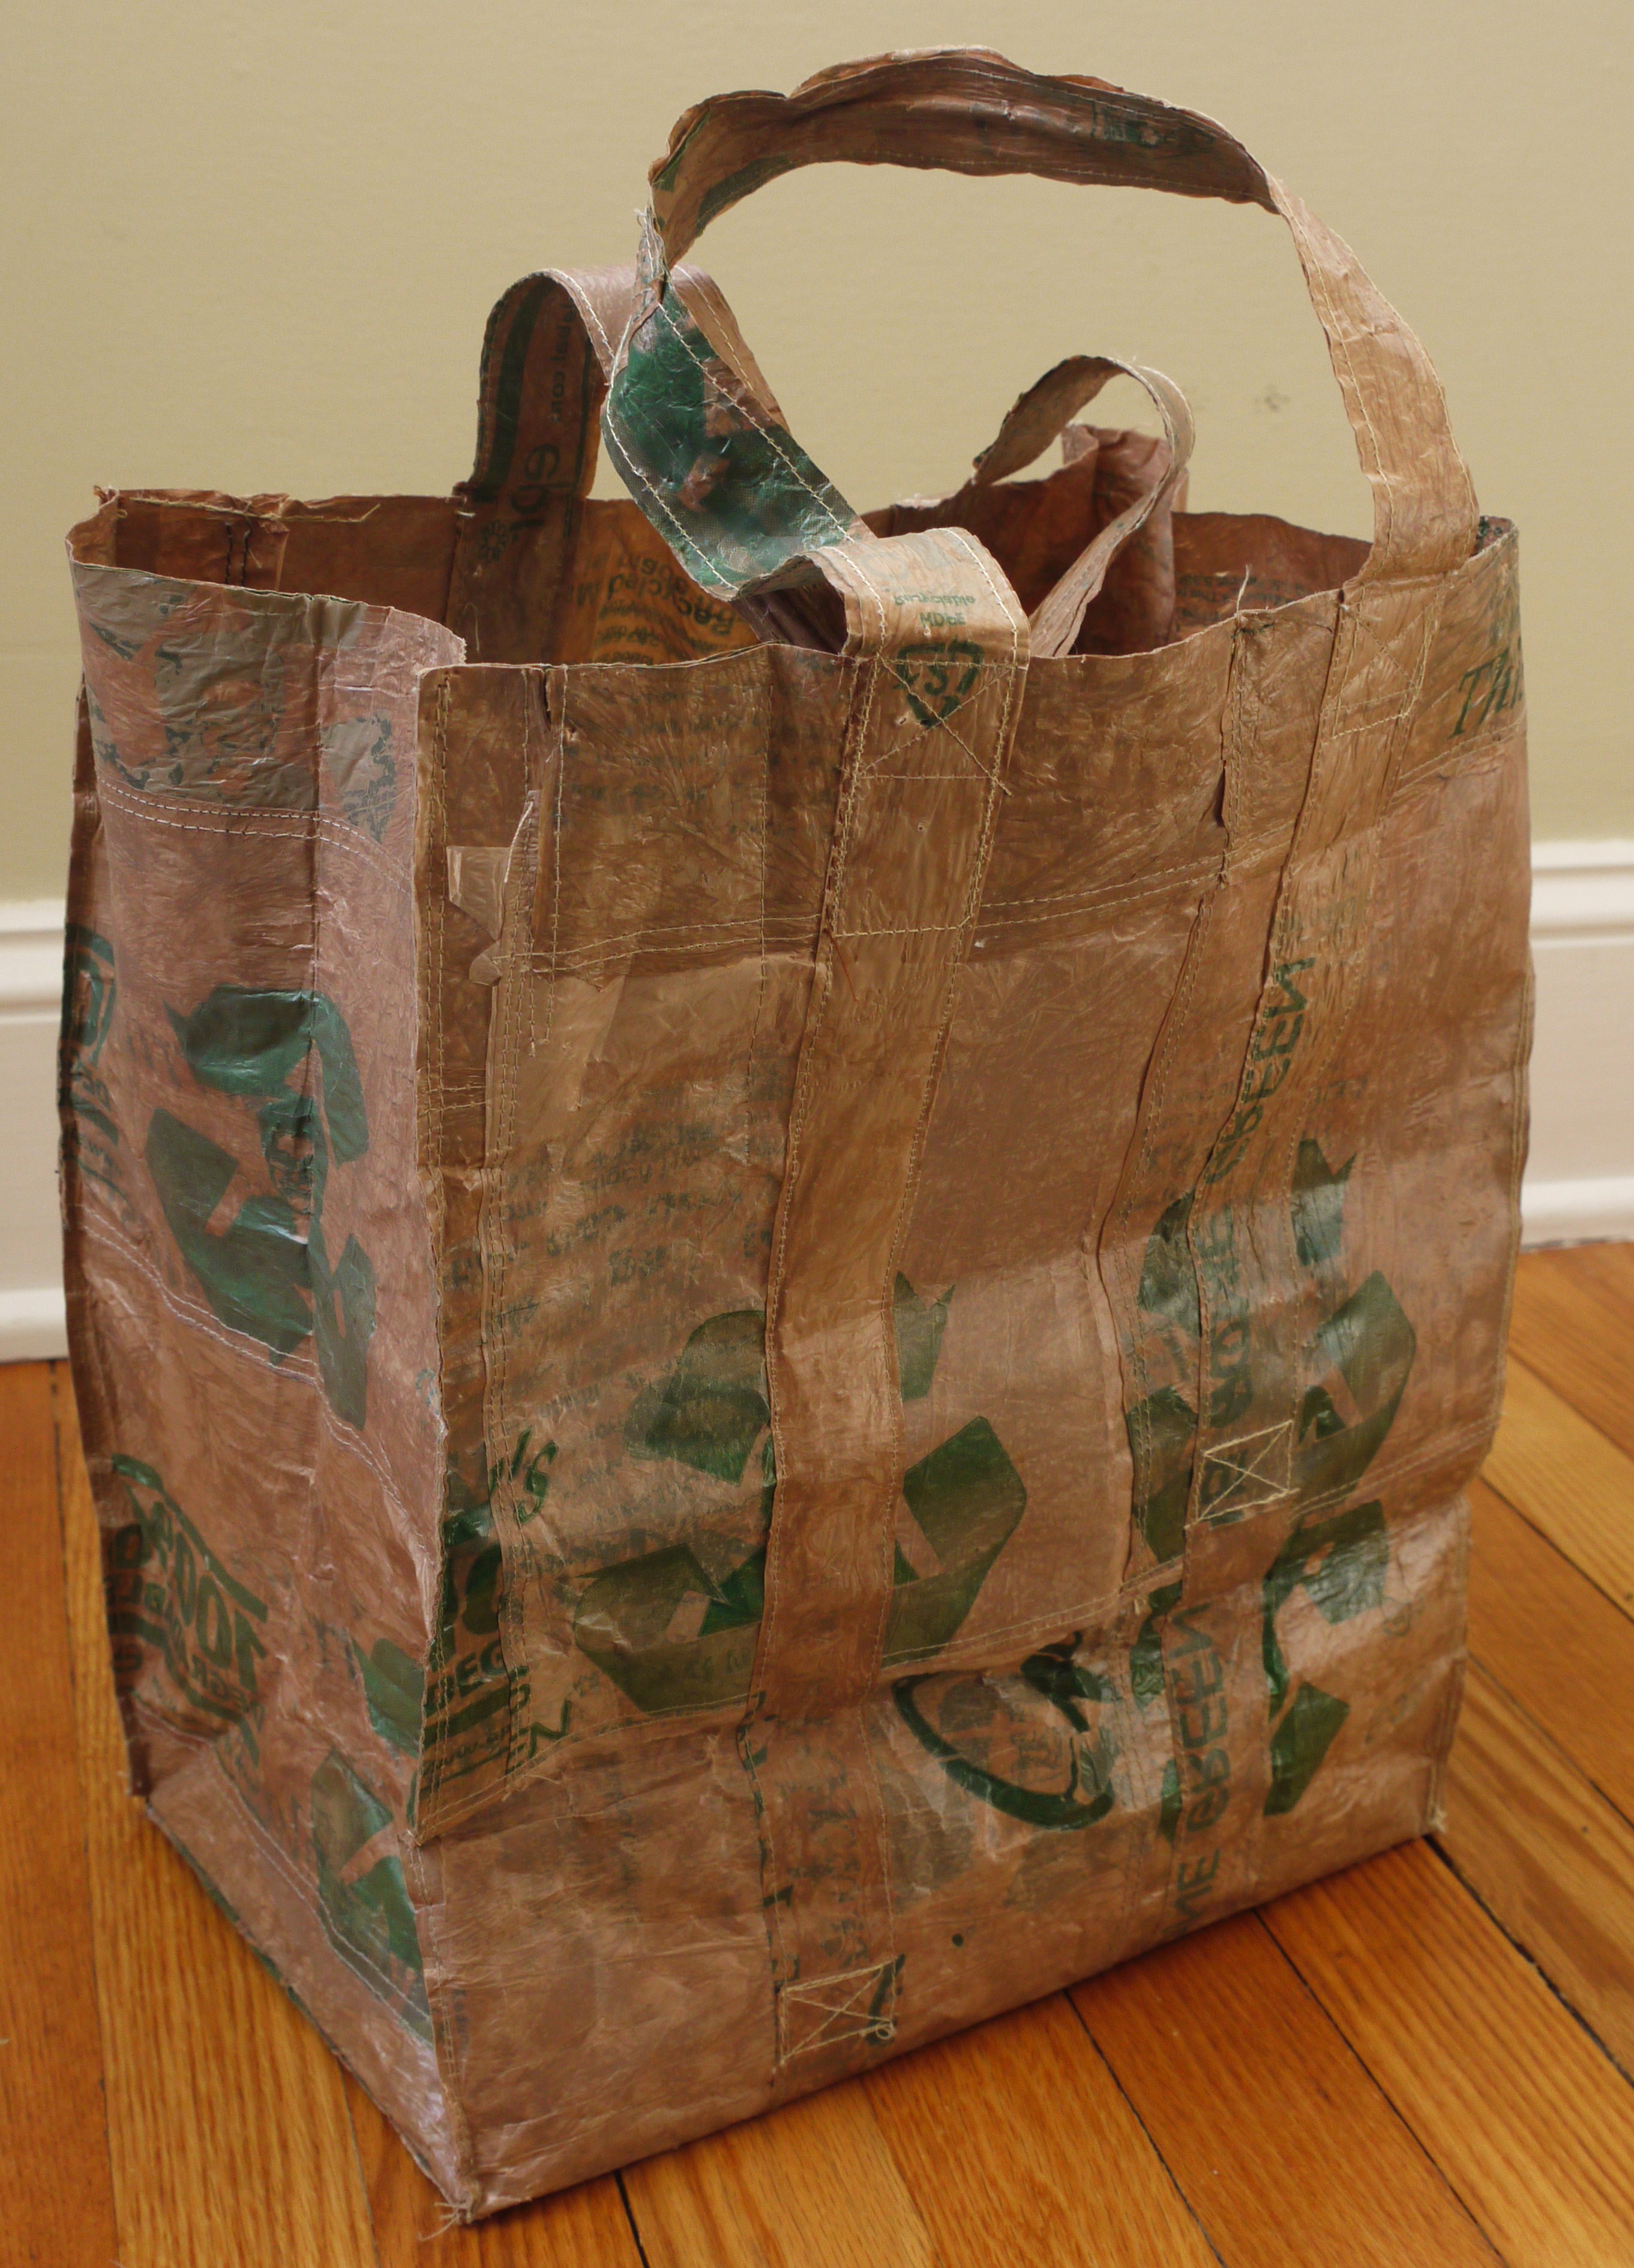 Reusable Shopping Bag From Plastic Grocery Bags